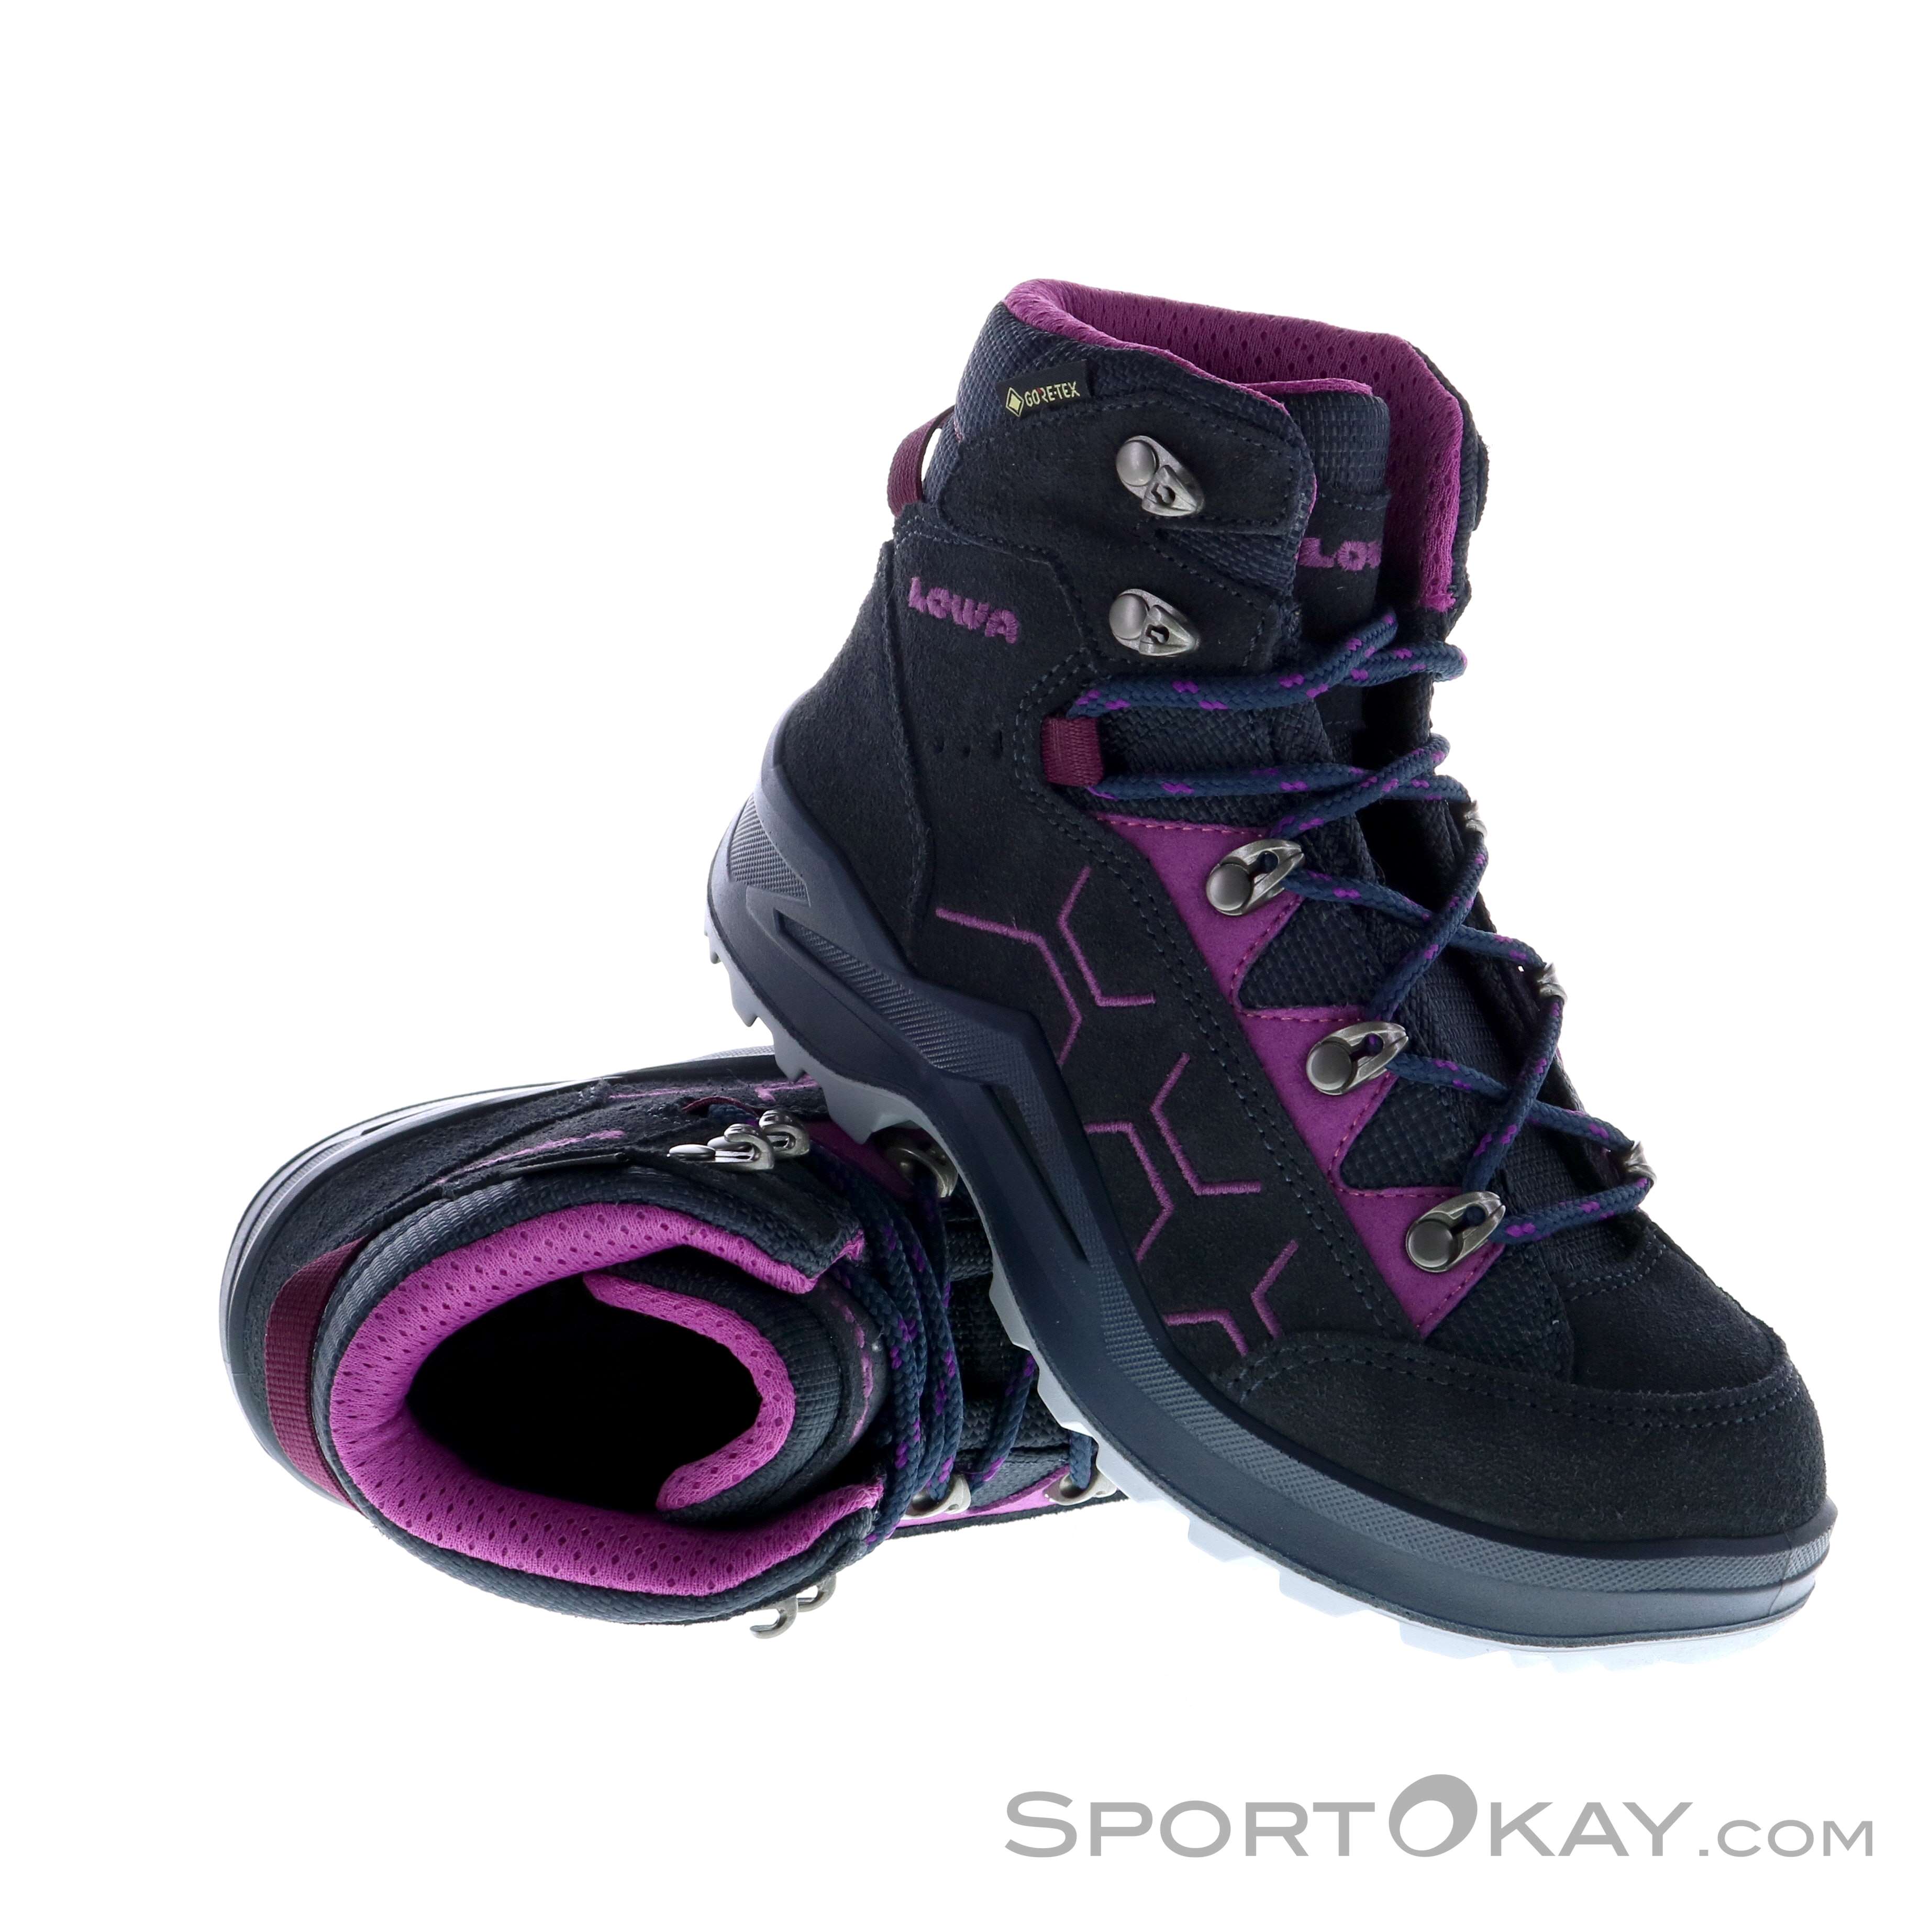 syndroom Geroosterd lekken Lowa Kody Evo Mid GTX Kids Hiking Boots - Hiking Boots - Shoes & Poles -  Outdoor - All